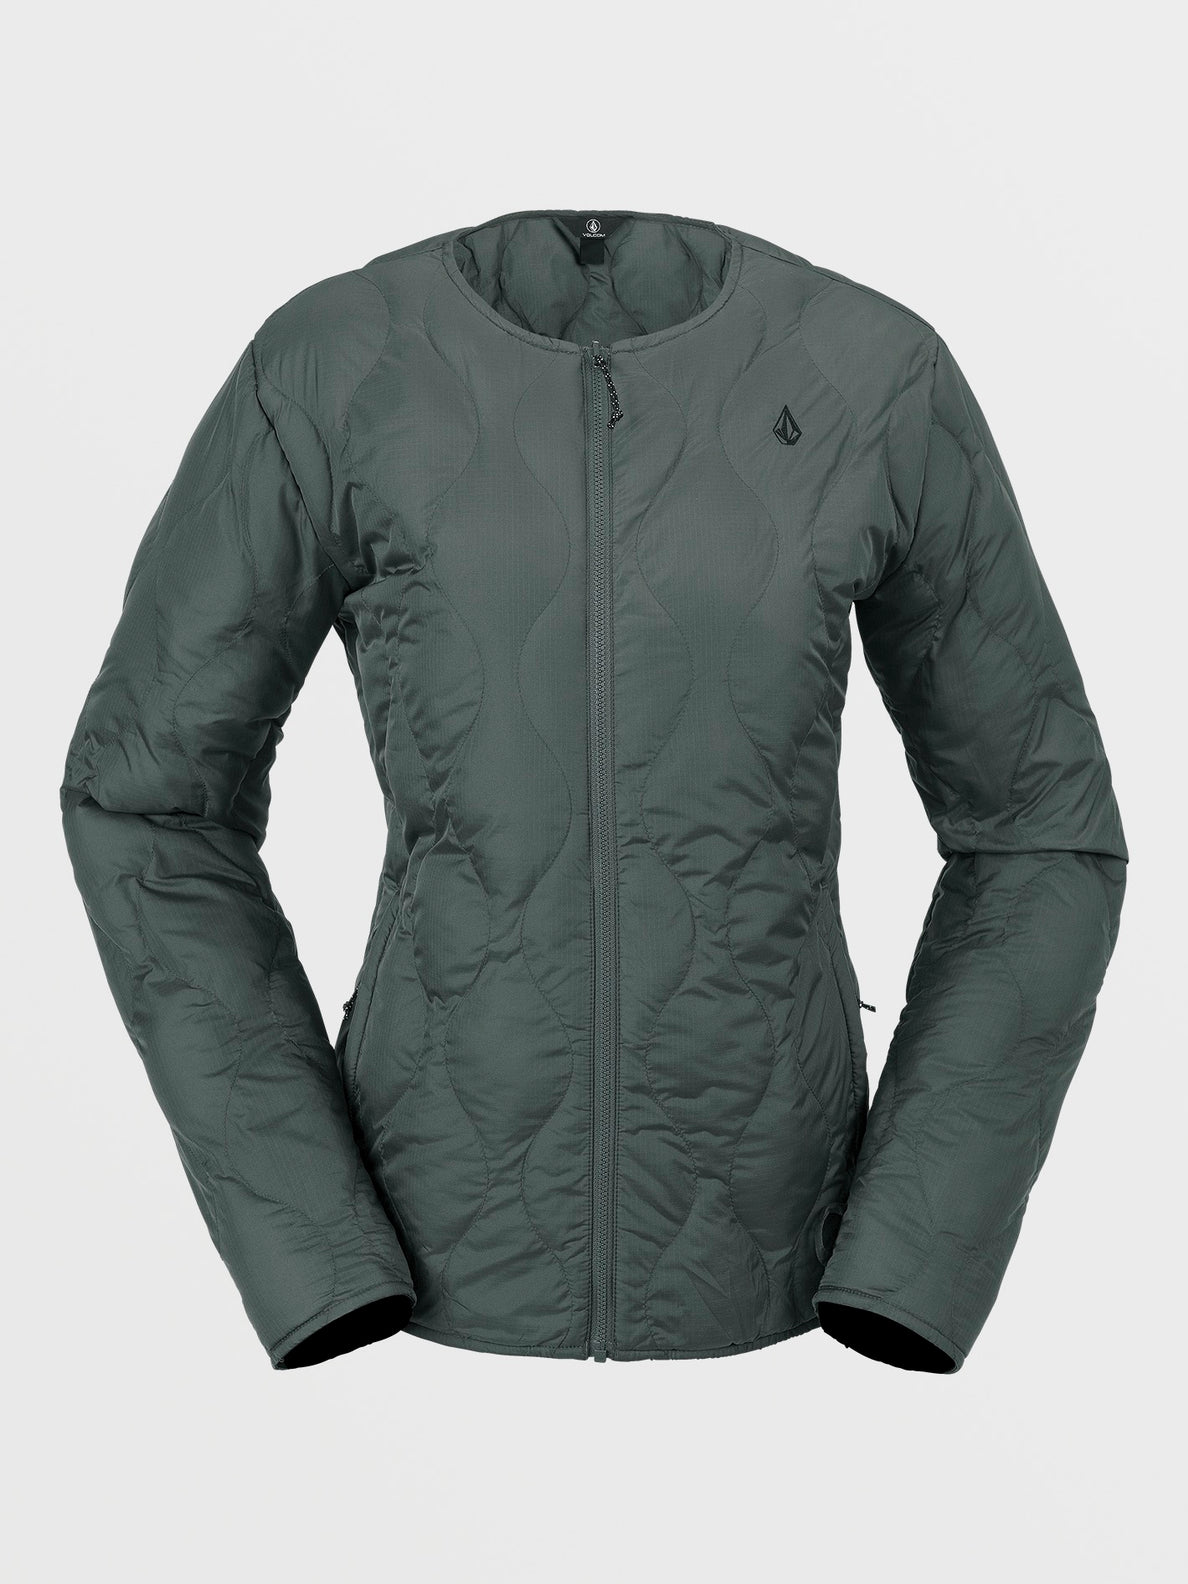 Womens Aw 3-In-1 Gore-Tex Jacket - Sage Frost (H0452401_SGF) [1]